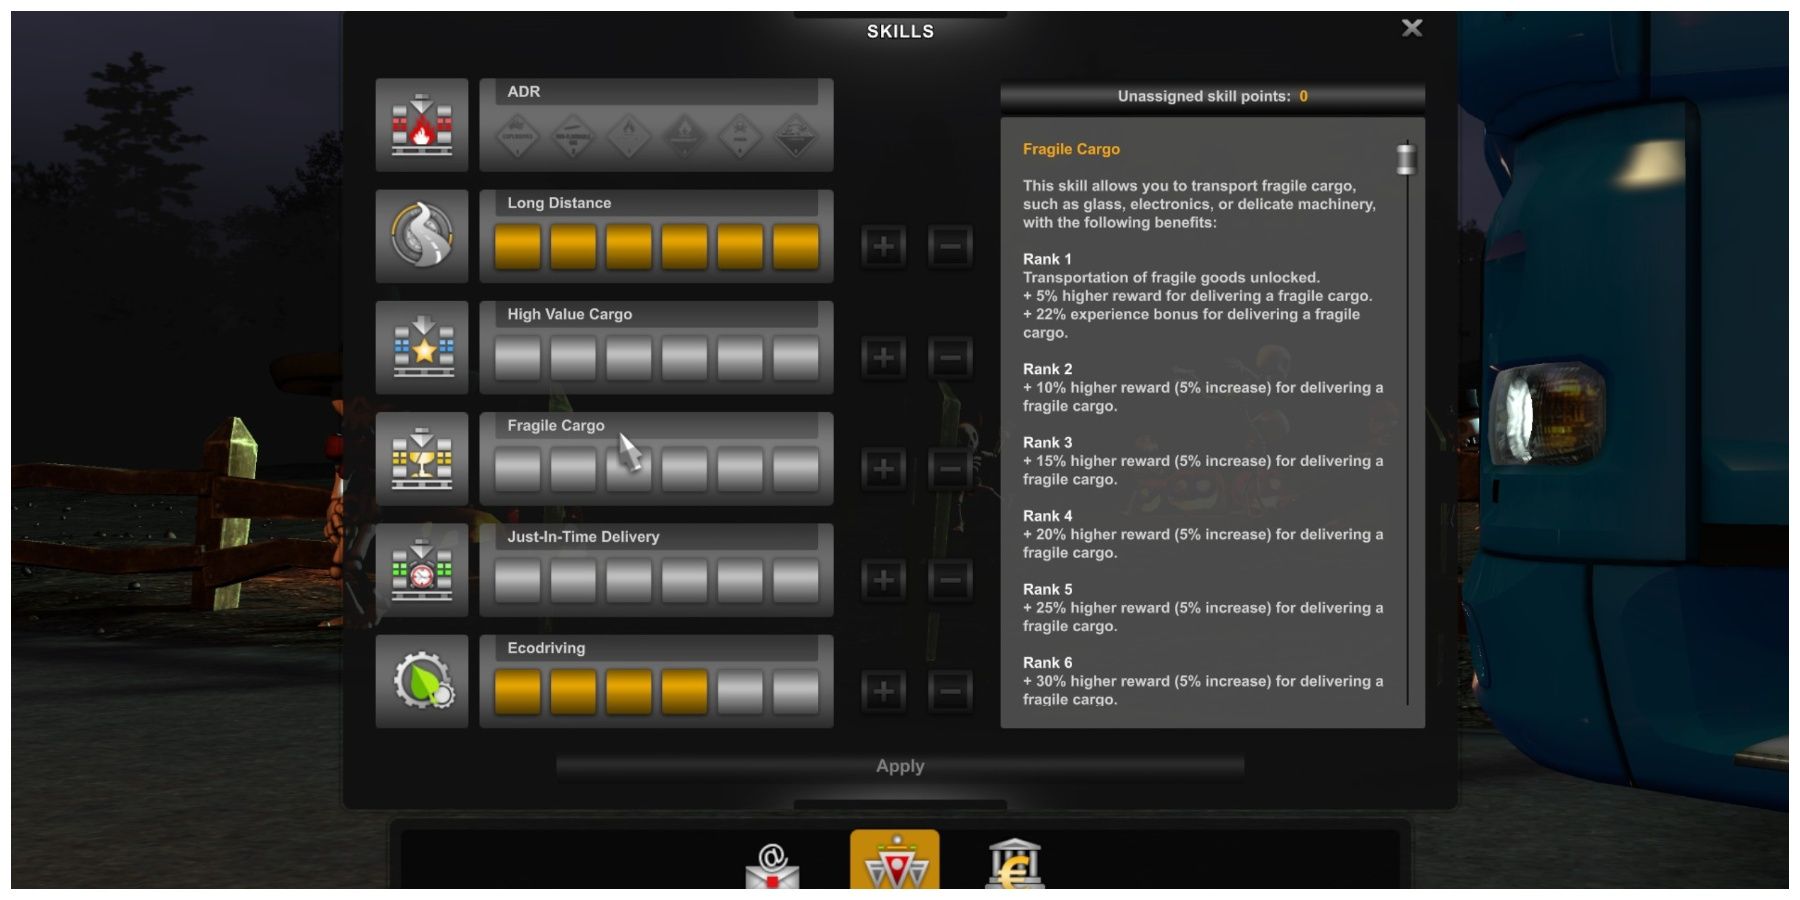 A screen showing the ranks of the Fragile Cargo skill in Euro Truck Simulator 2